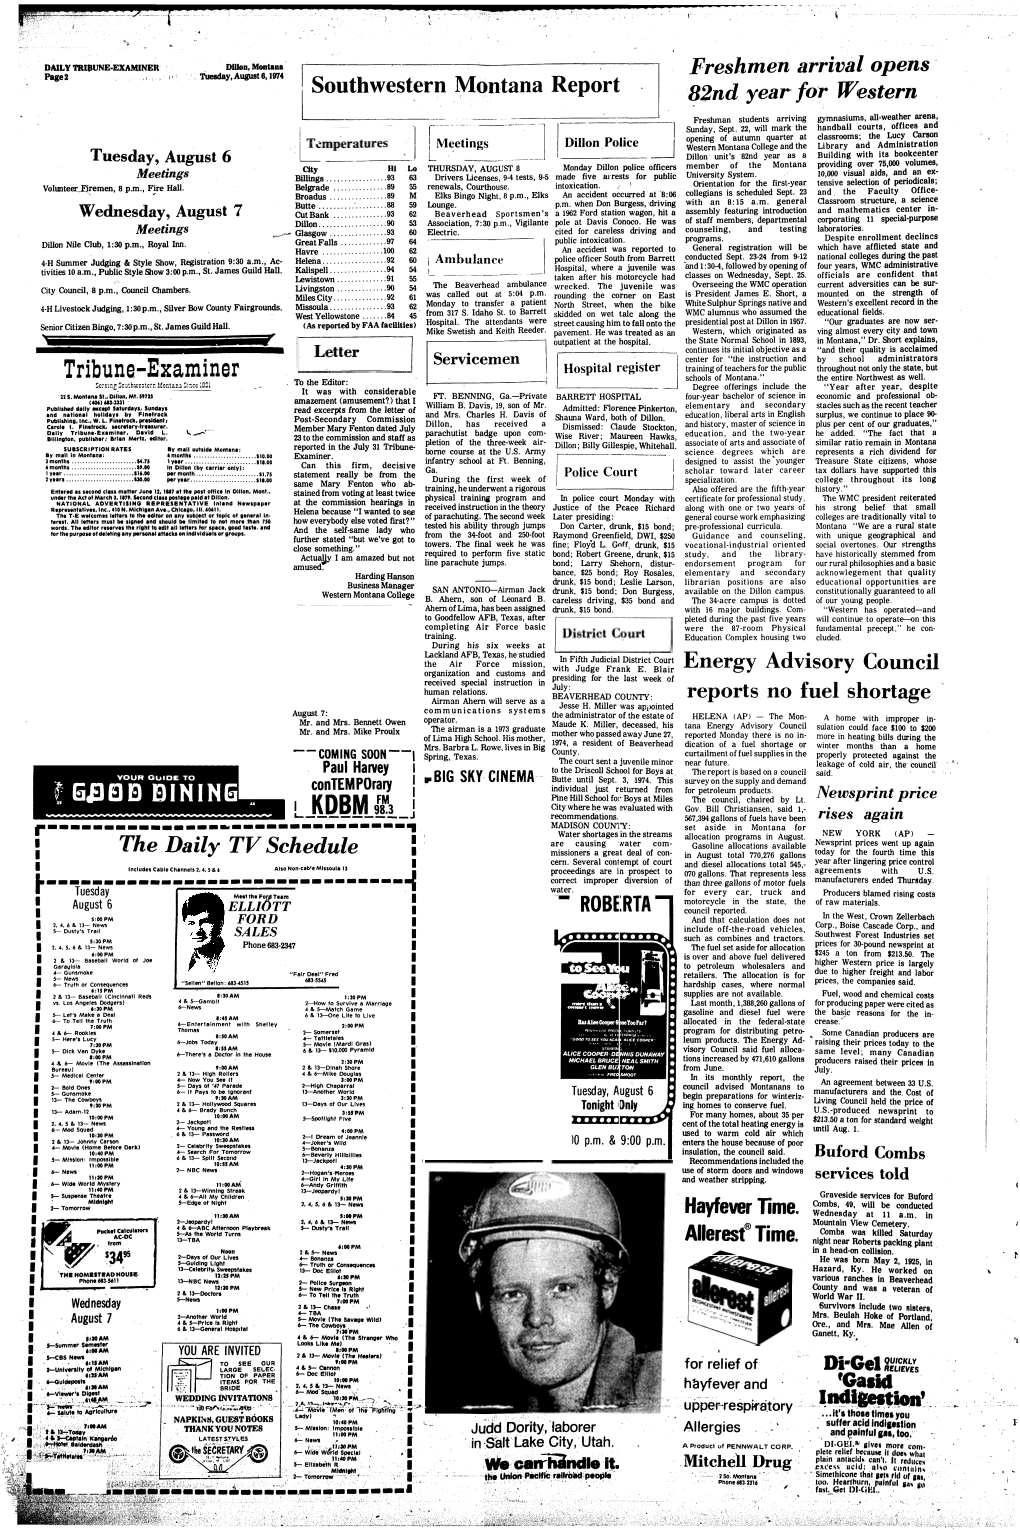 TRIBUNE-EXAMINER Dillon, Montana Freshmen Arrival Opens Page 2 Tuesday, August 6,1974 Southwestern Montana Report 82Nd Year for Western